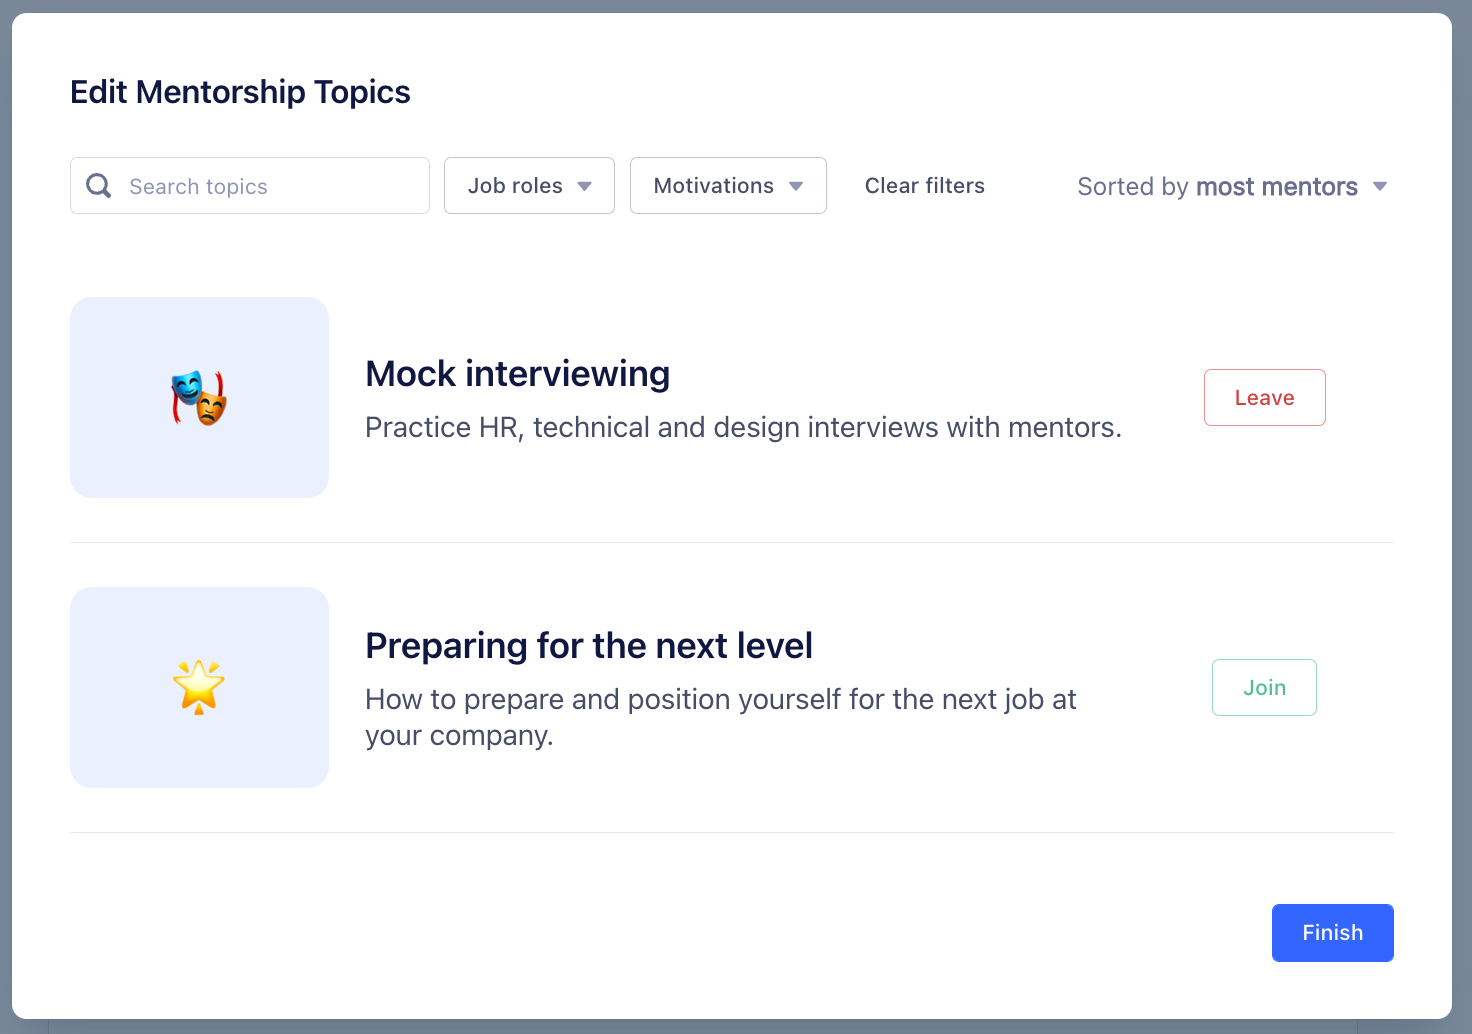 A screenshot of the Edit Topics modal with an option to search, filter by Job Role or Motivation, clear filters, and sort. Each topic has an emoji, a title, and a description with a button to leave or join.